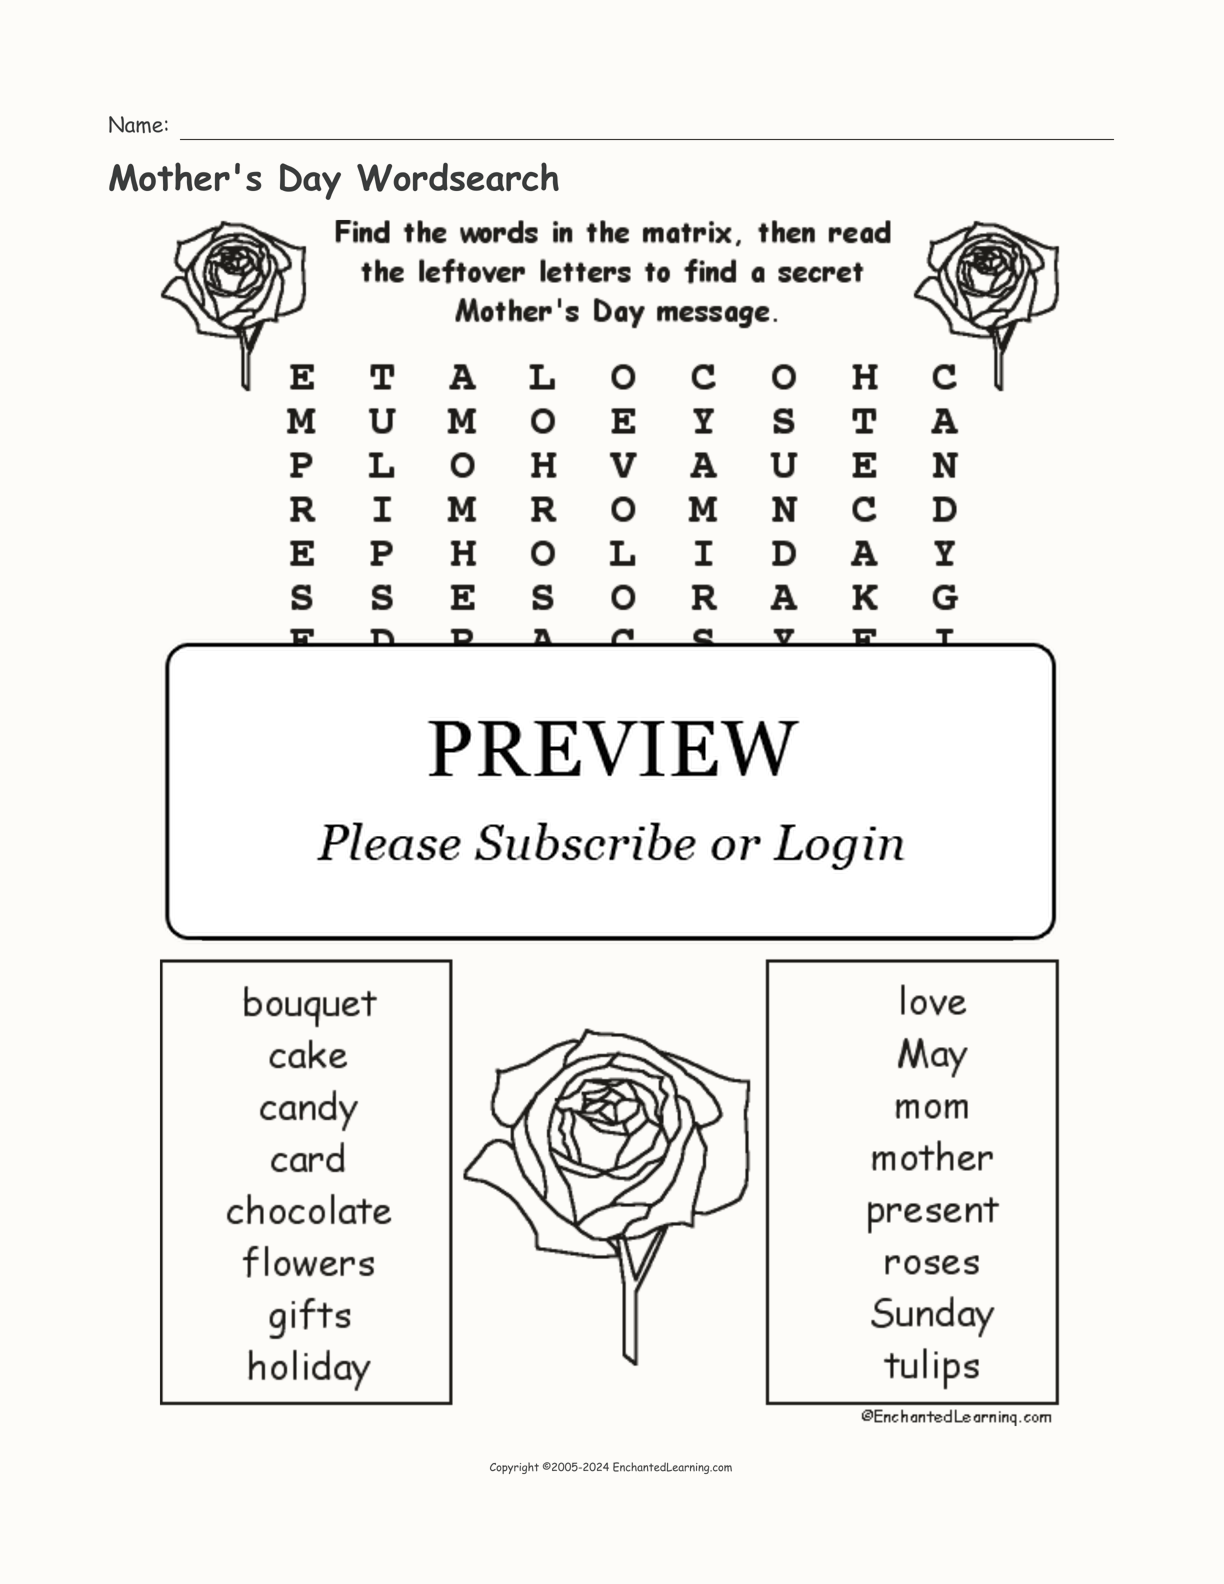 Mother's Day Wordsearch interactive worksheet page 1